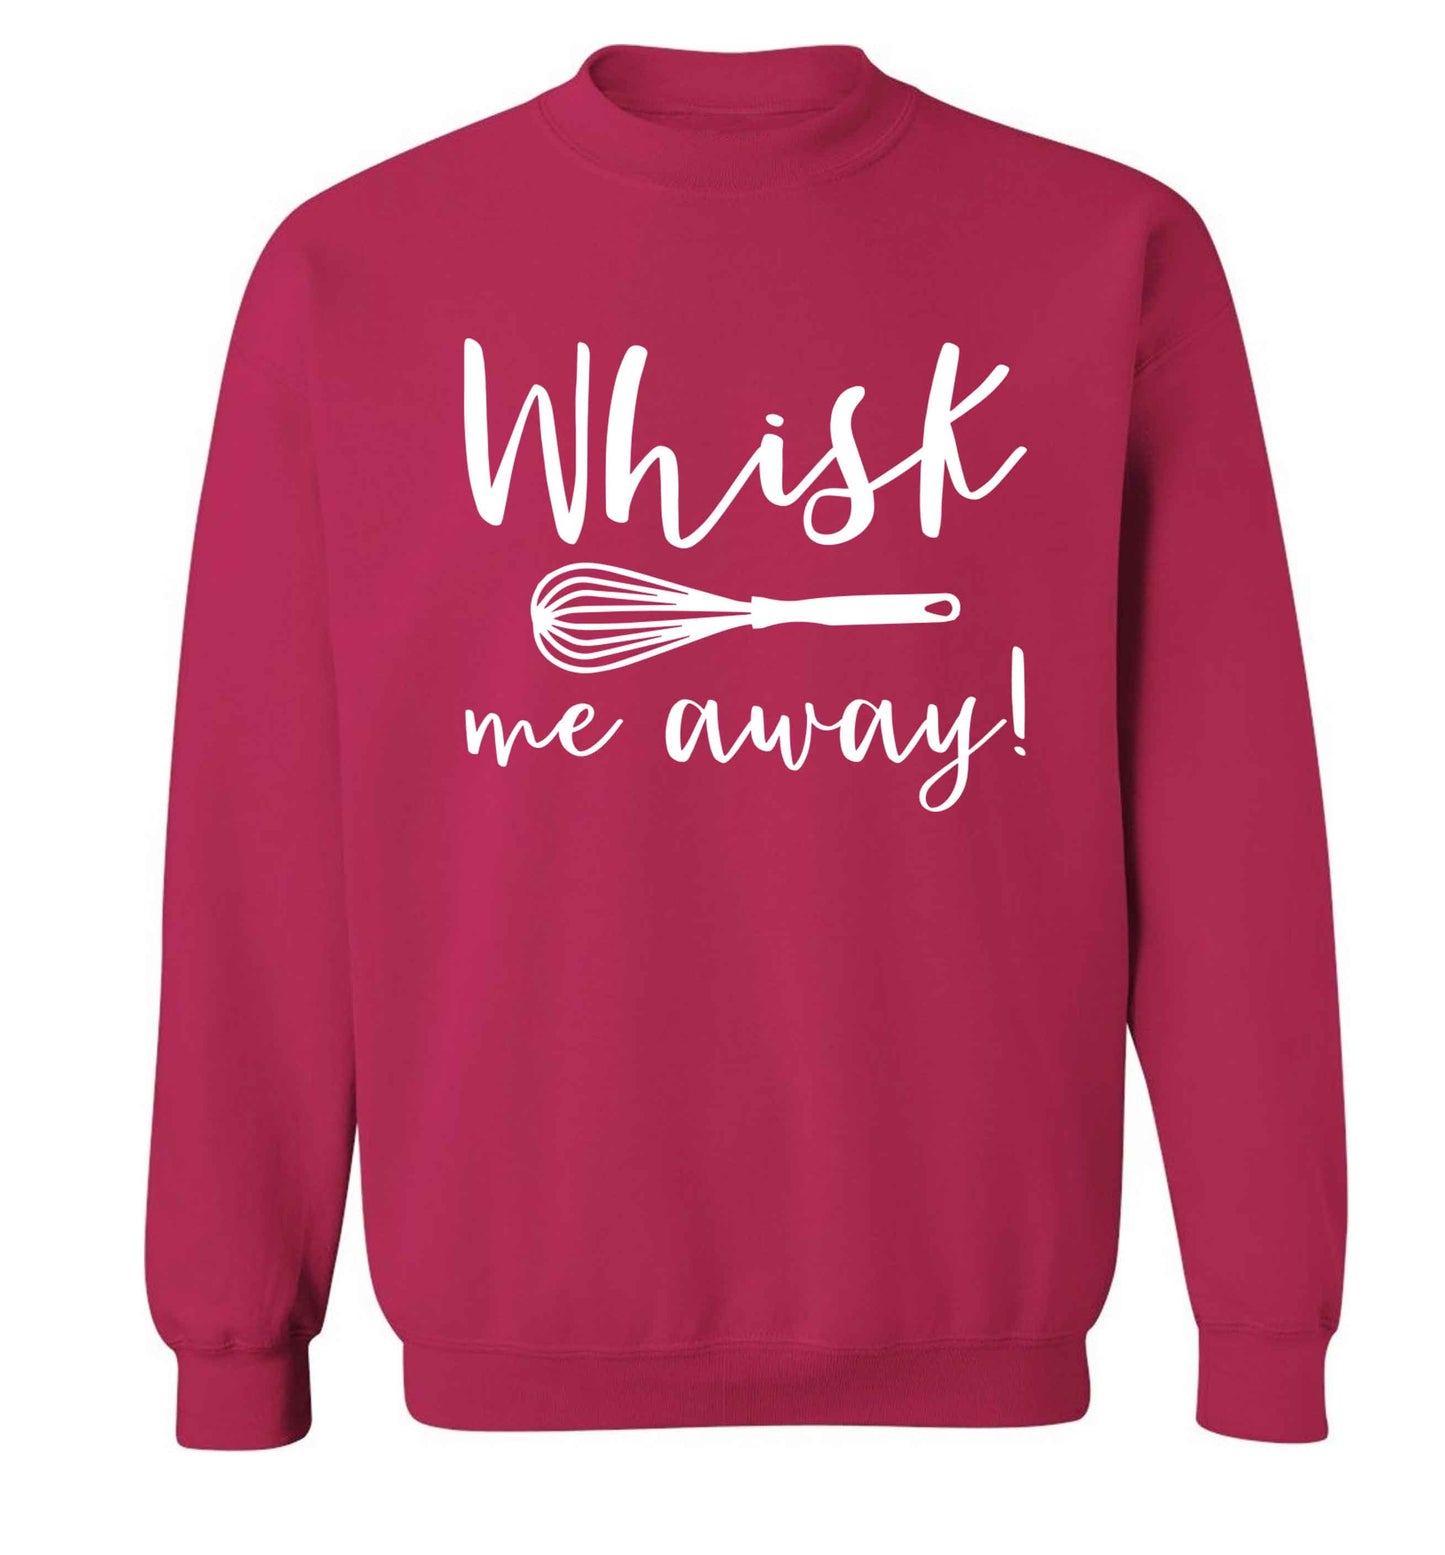 Whisk me away Adult's unisex pink Sweater 2XL